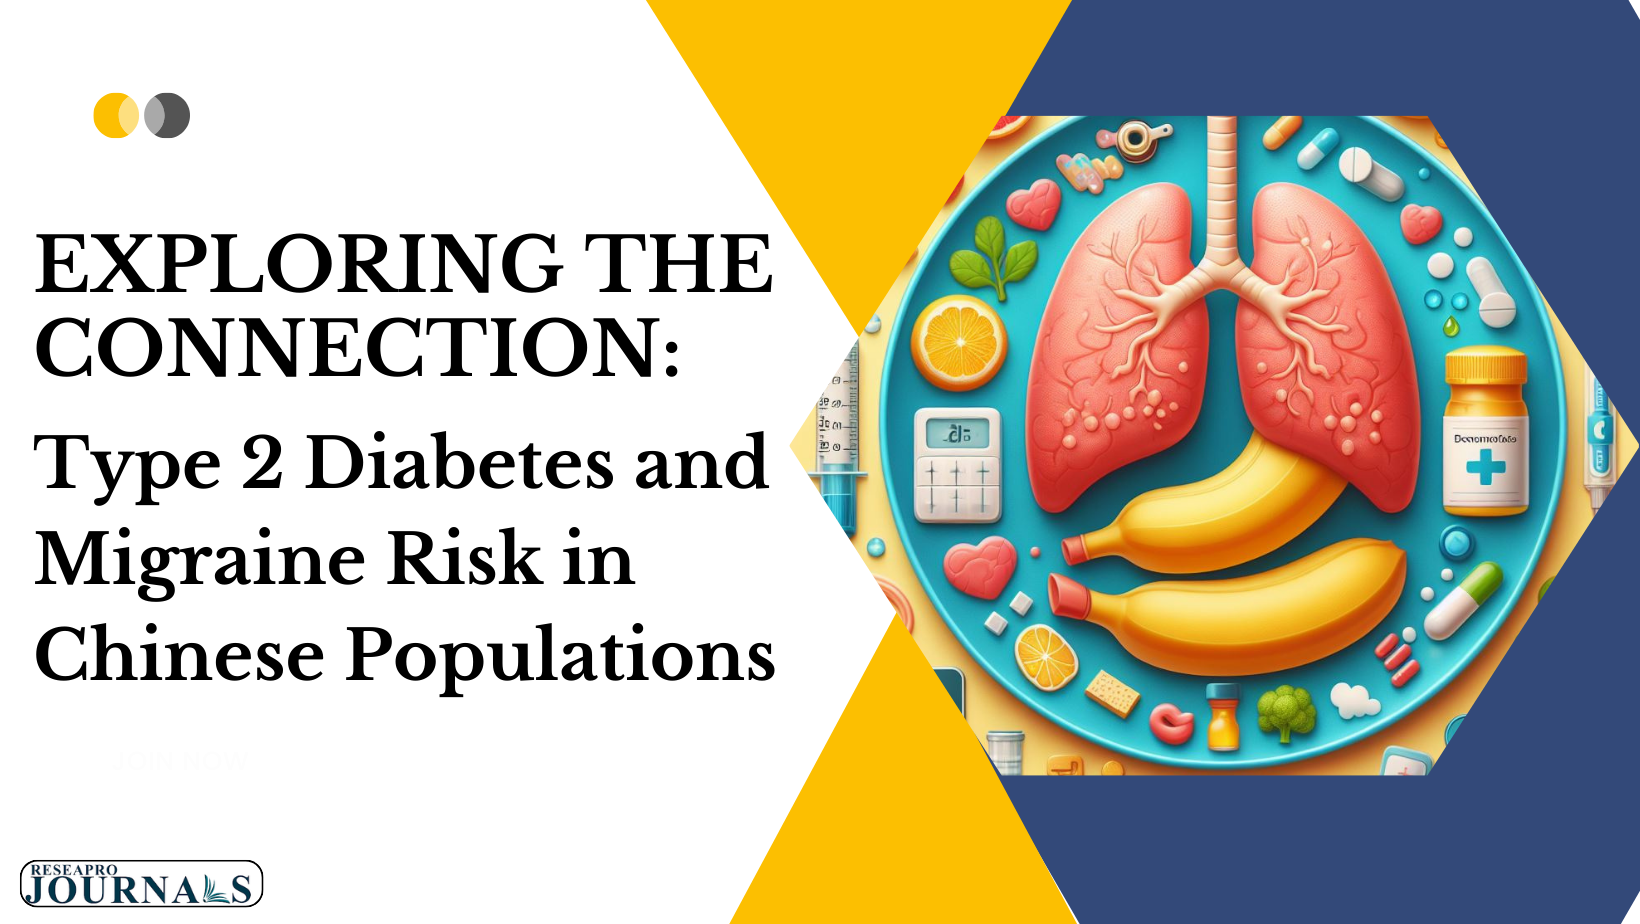 EXPLORING THE CONNECTION: Type 2 Diabetes and Migraine Risk in Chinese Populations